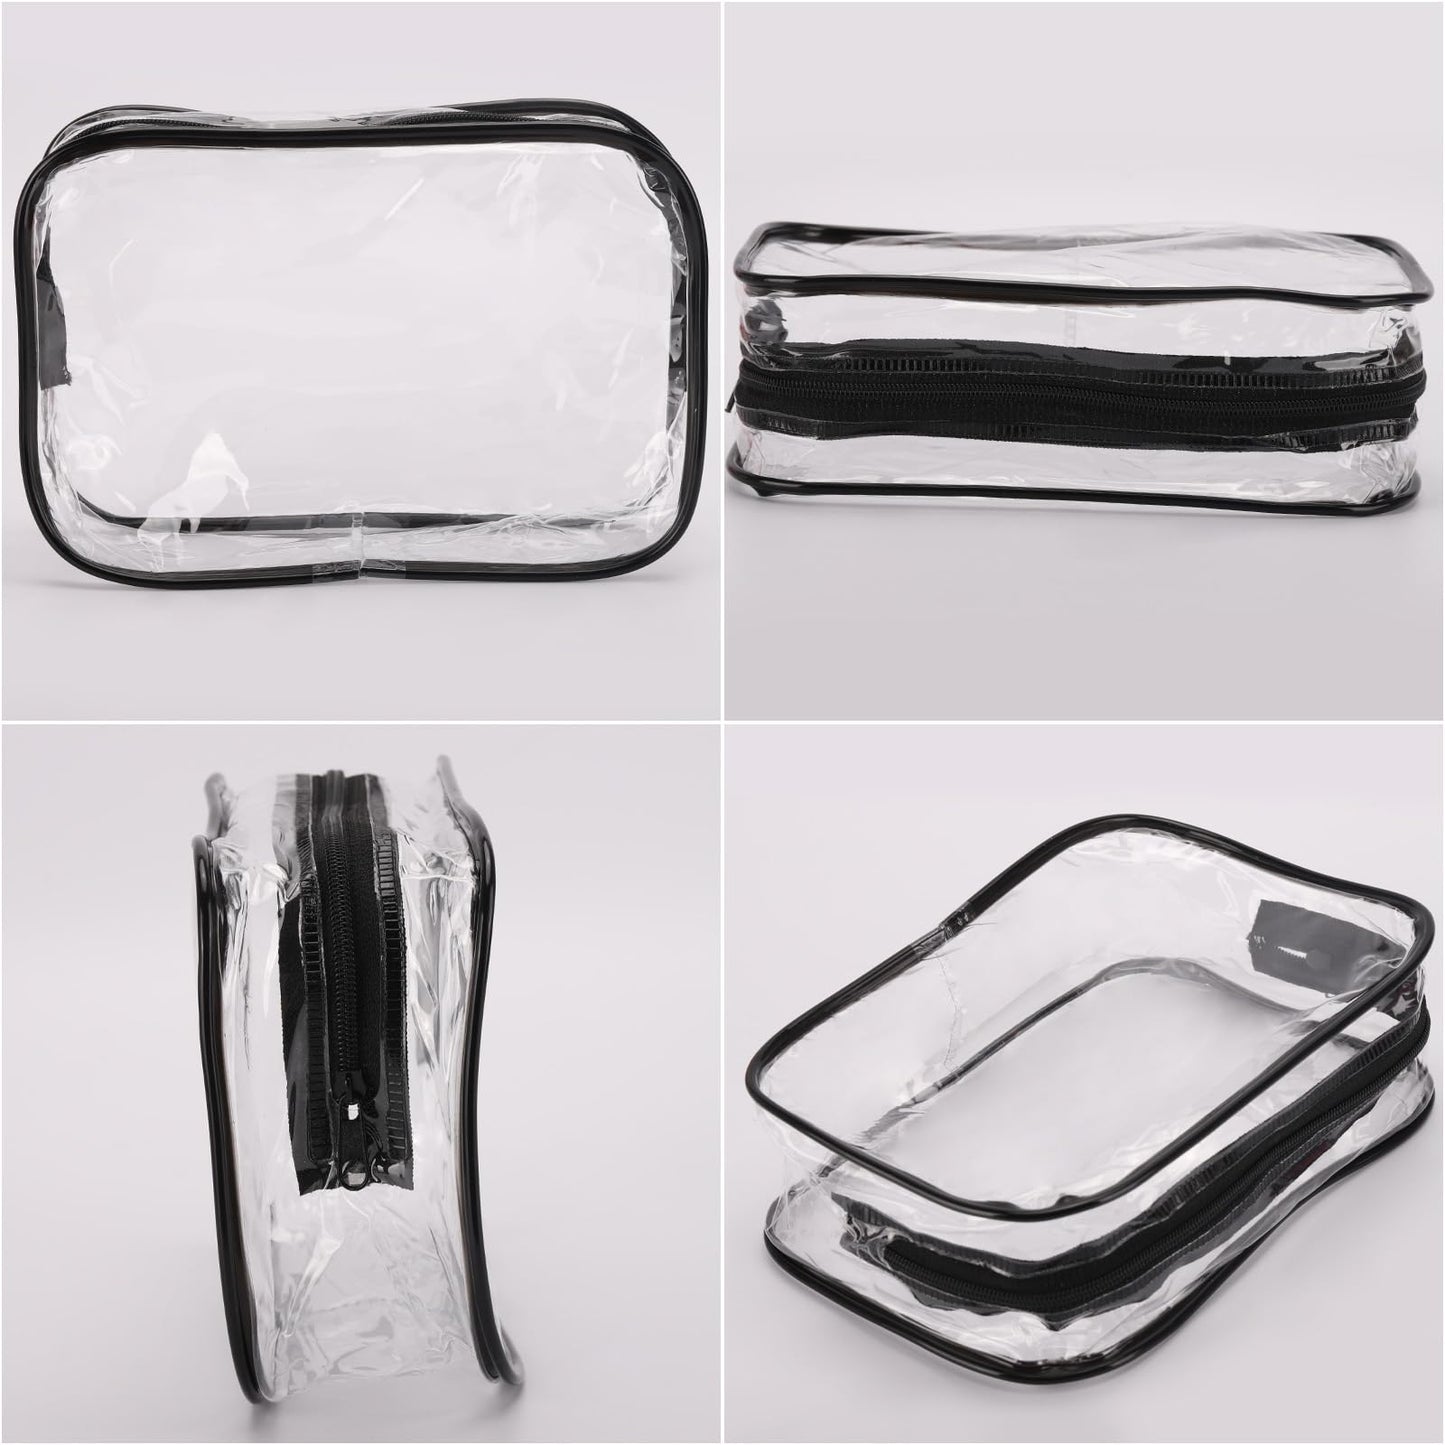 Tbestmax 10 Pcs Clear Cosmetic Bags Small Makeup Bags Portable Waterproof Travel Toiletry Bags Organizer Black, 7.5"x 4.8"x 2.3"